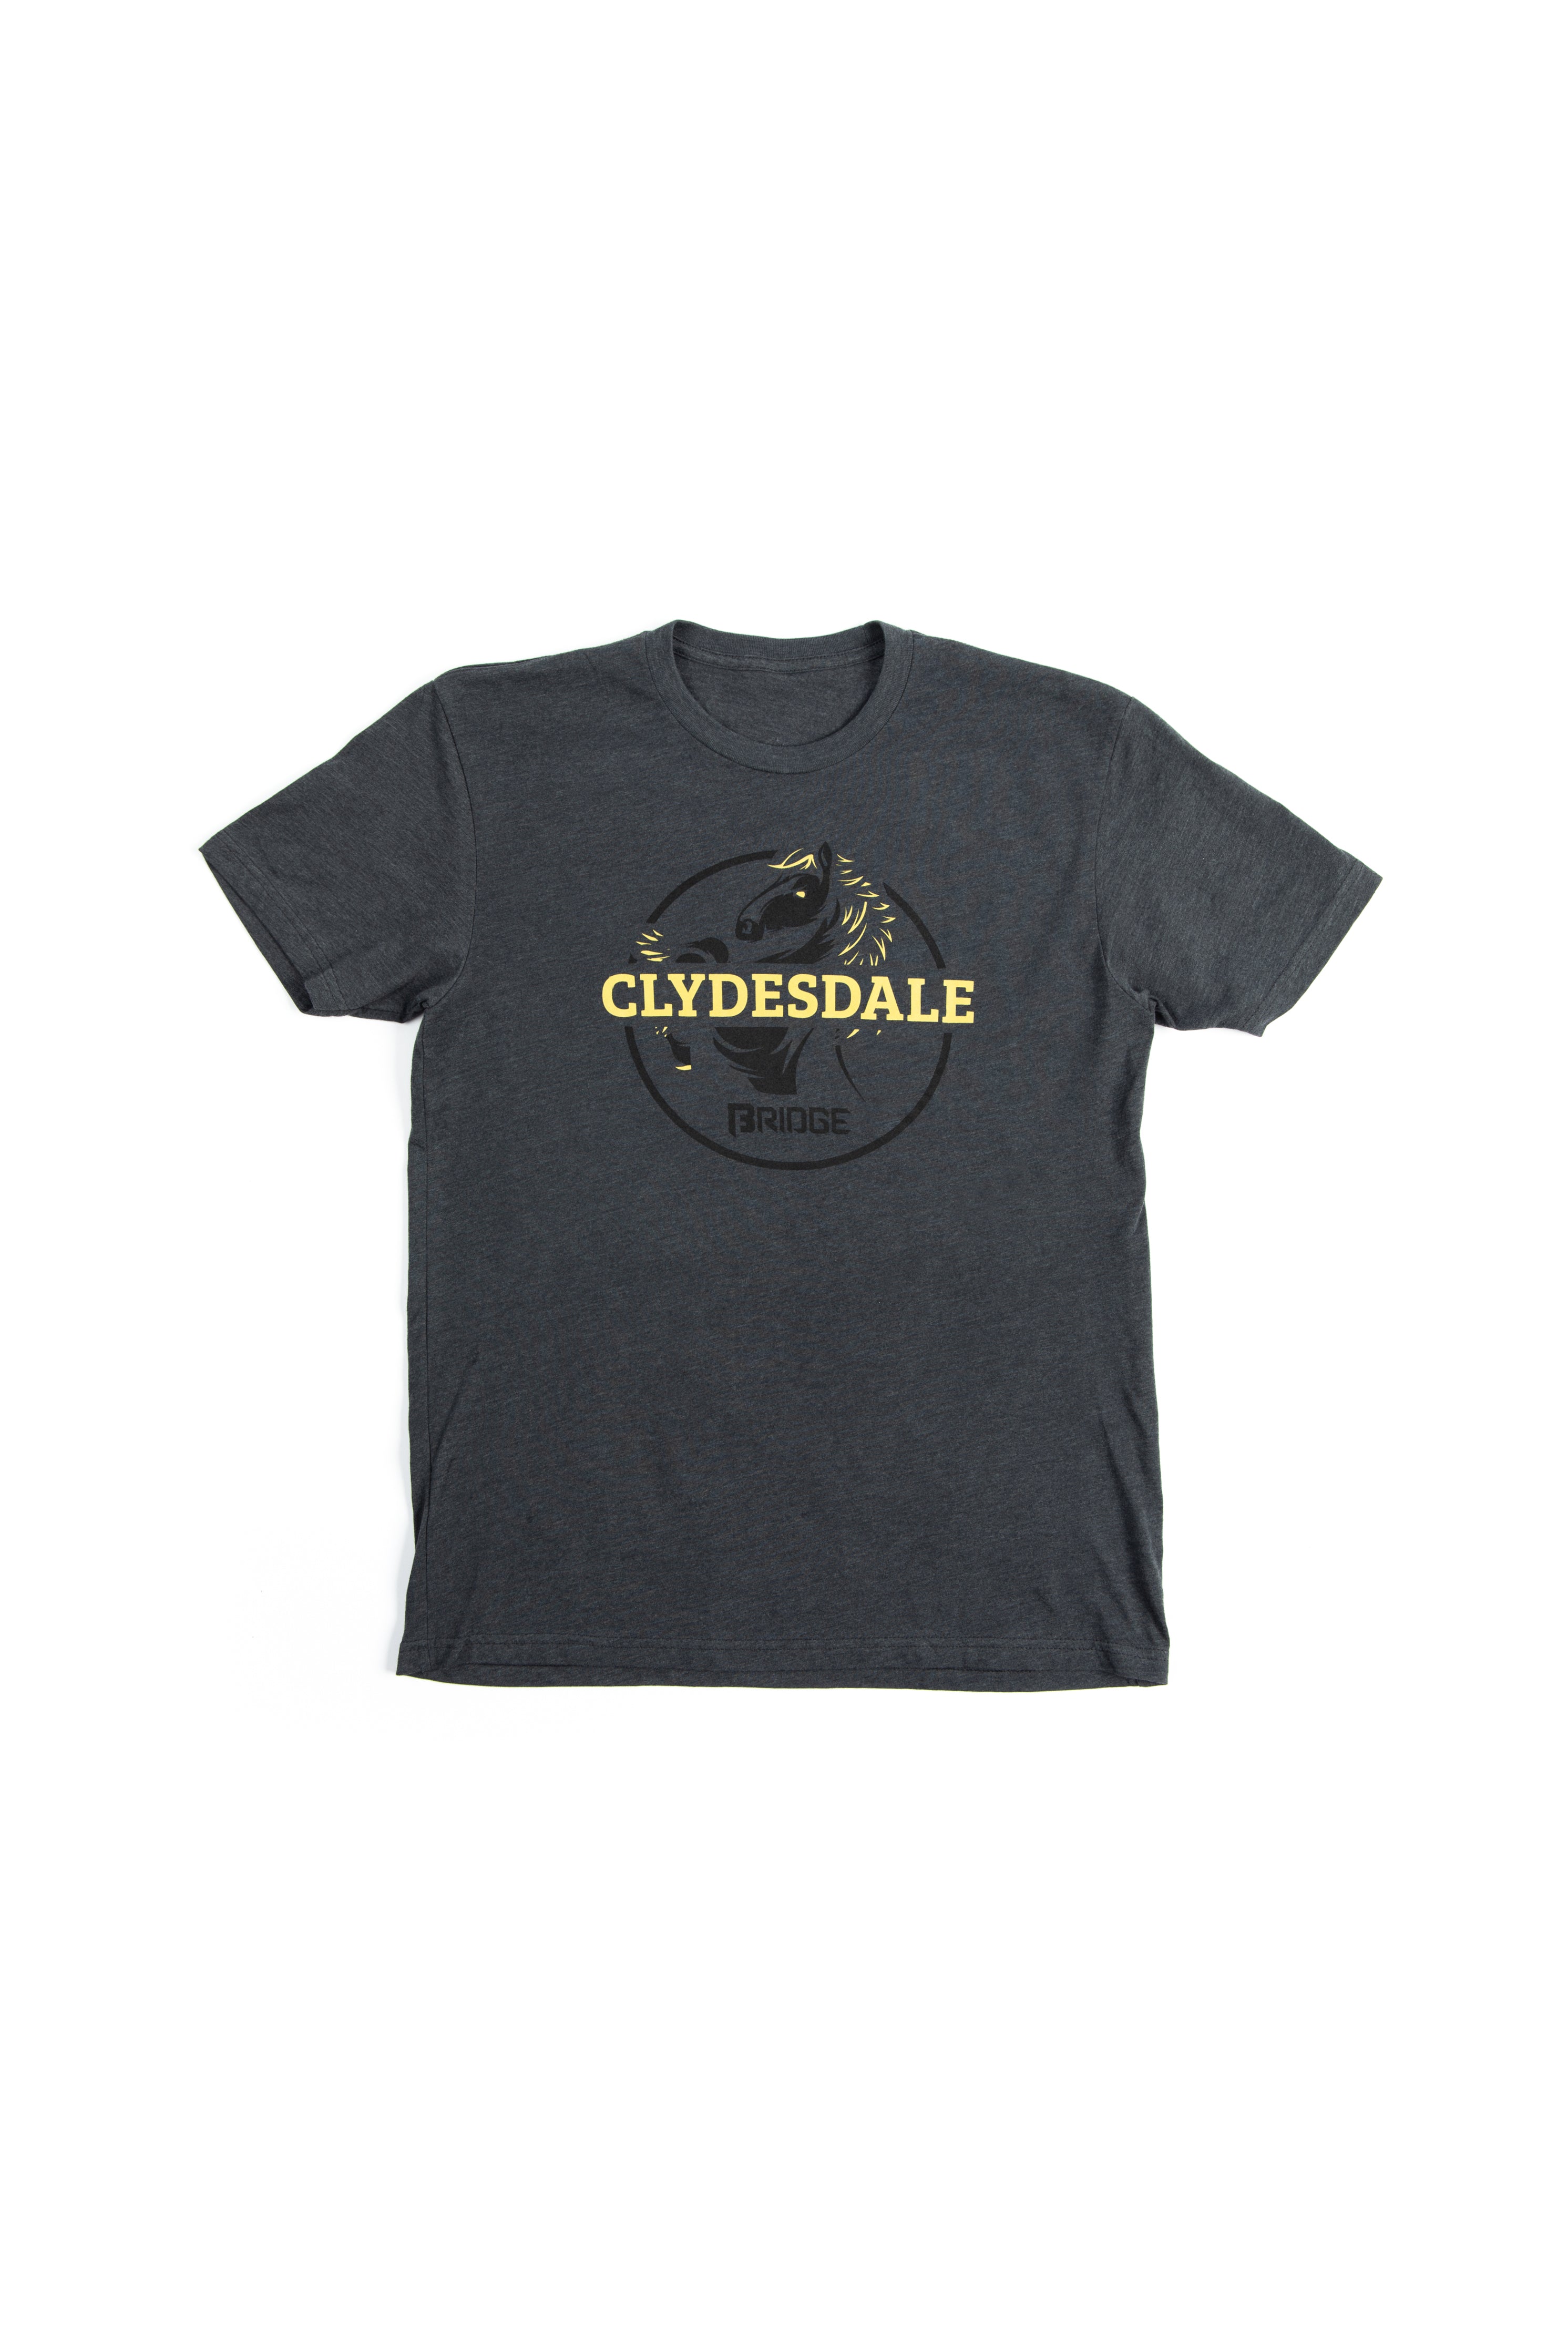 Clydesdale Tee